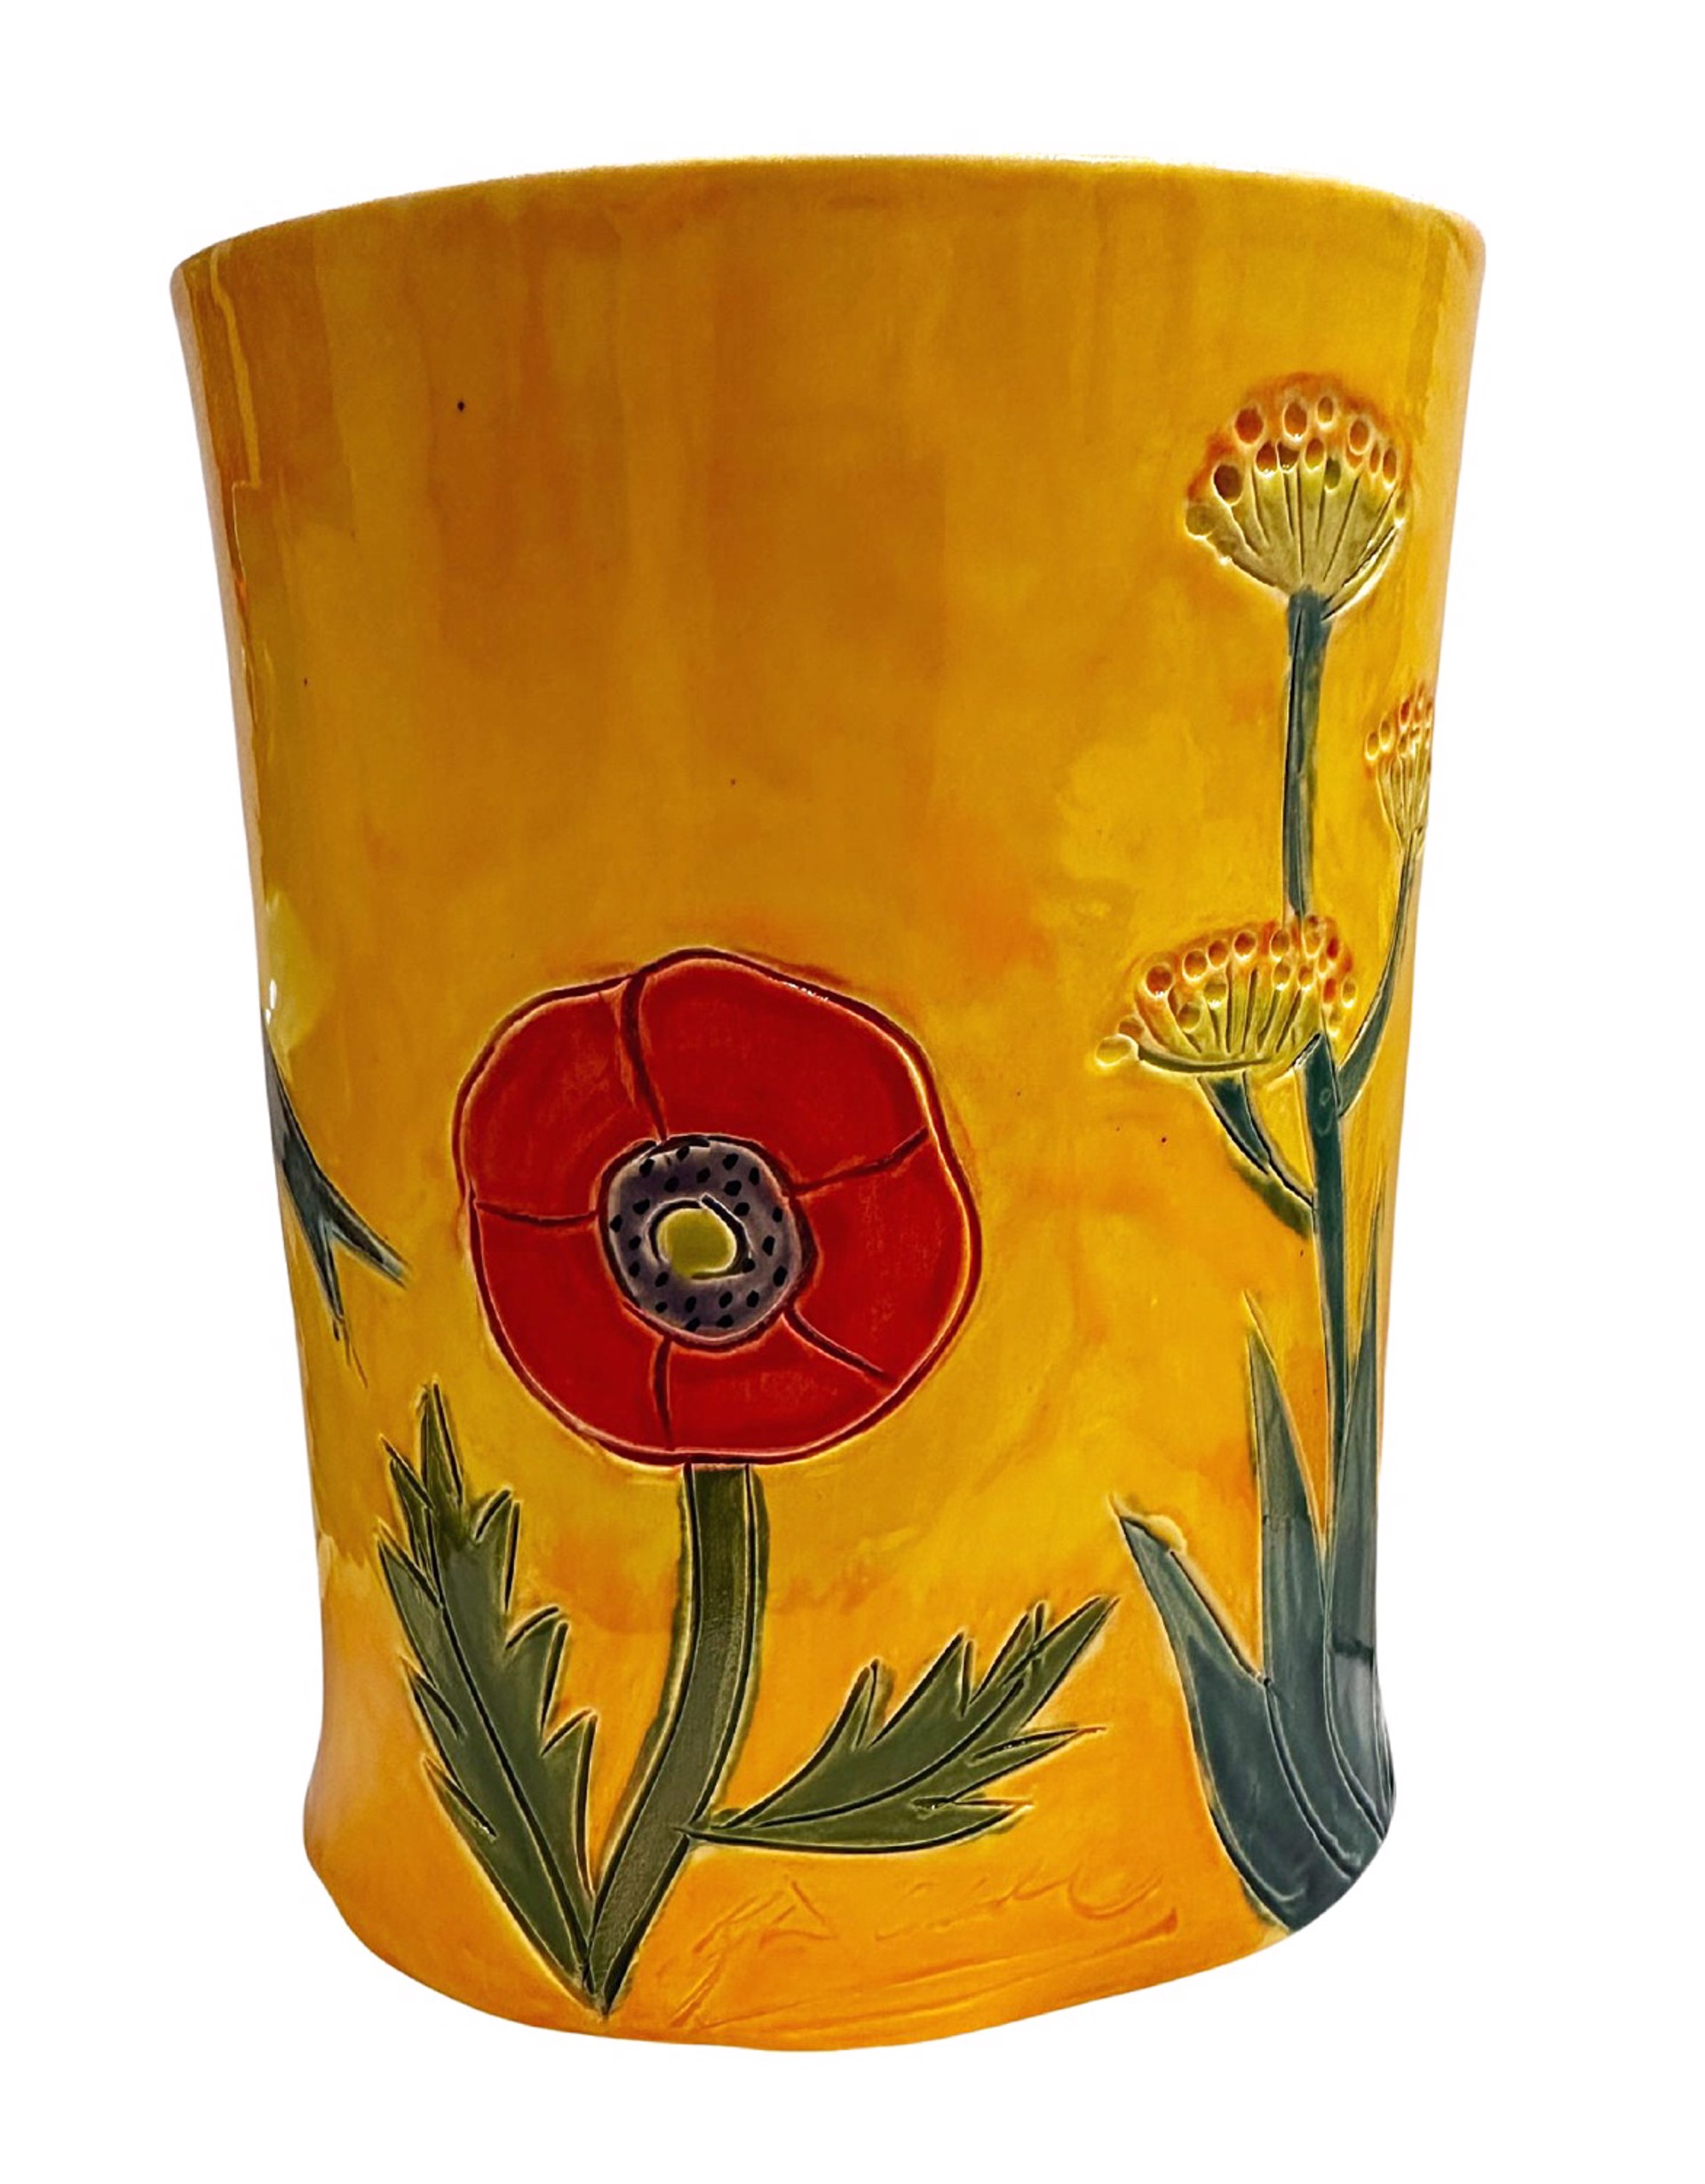 Vase - Orange and Yellow with Hummingbirds by Robin Chlad